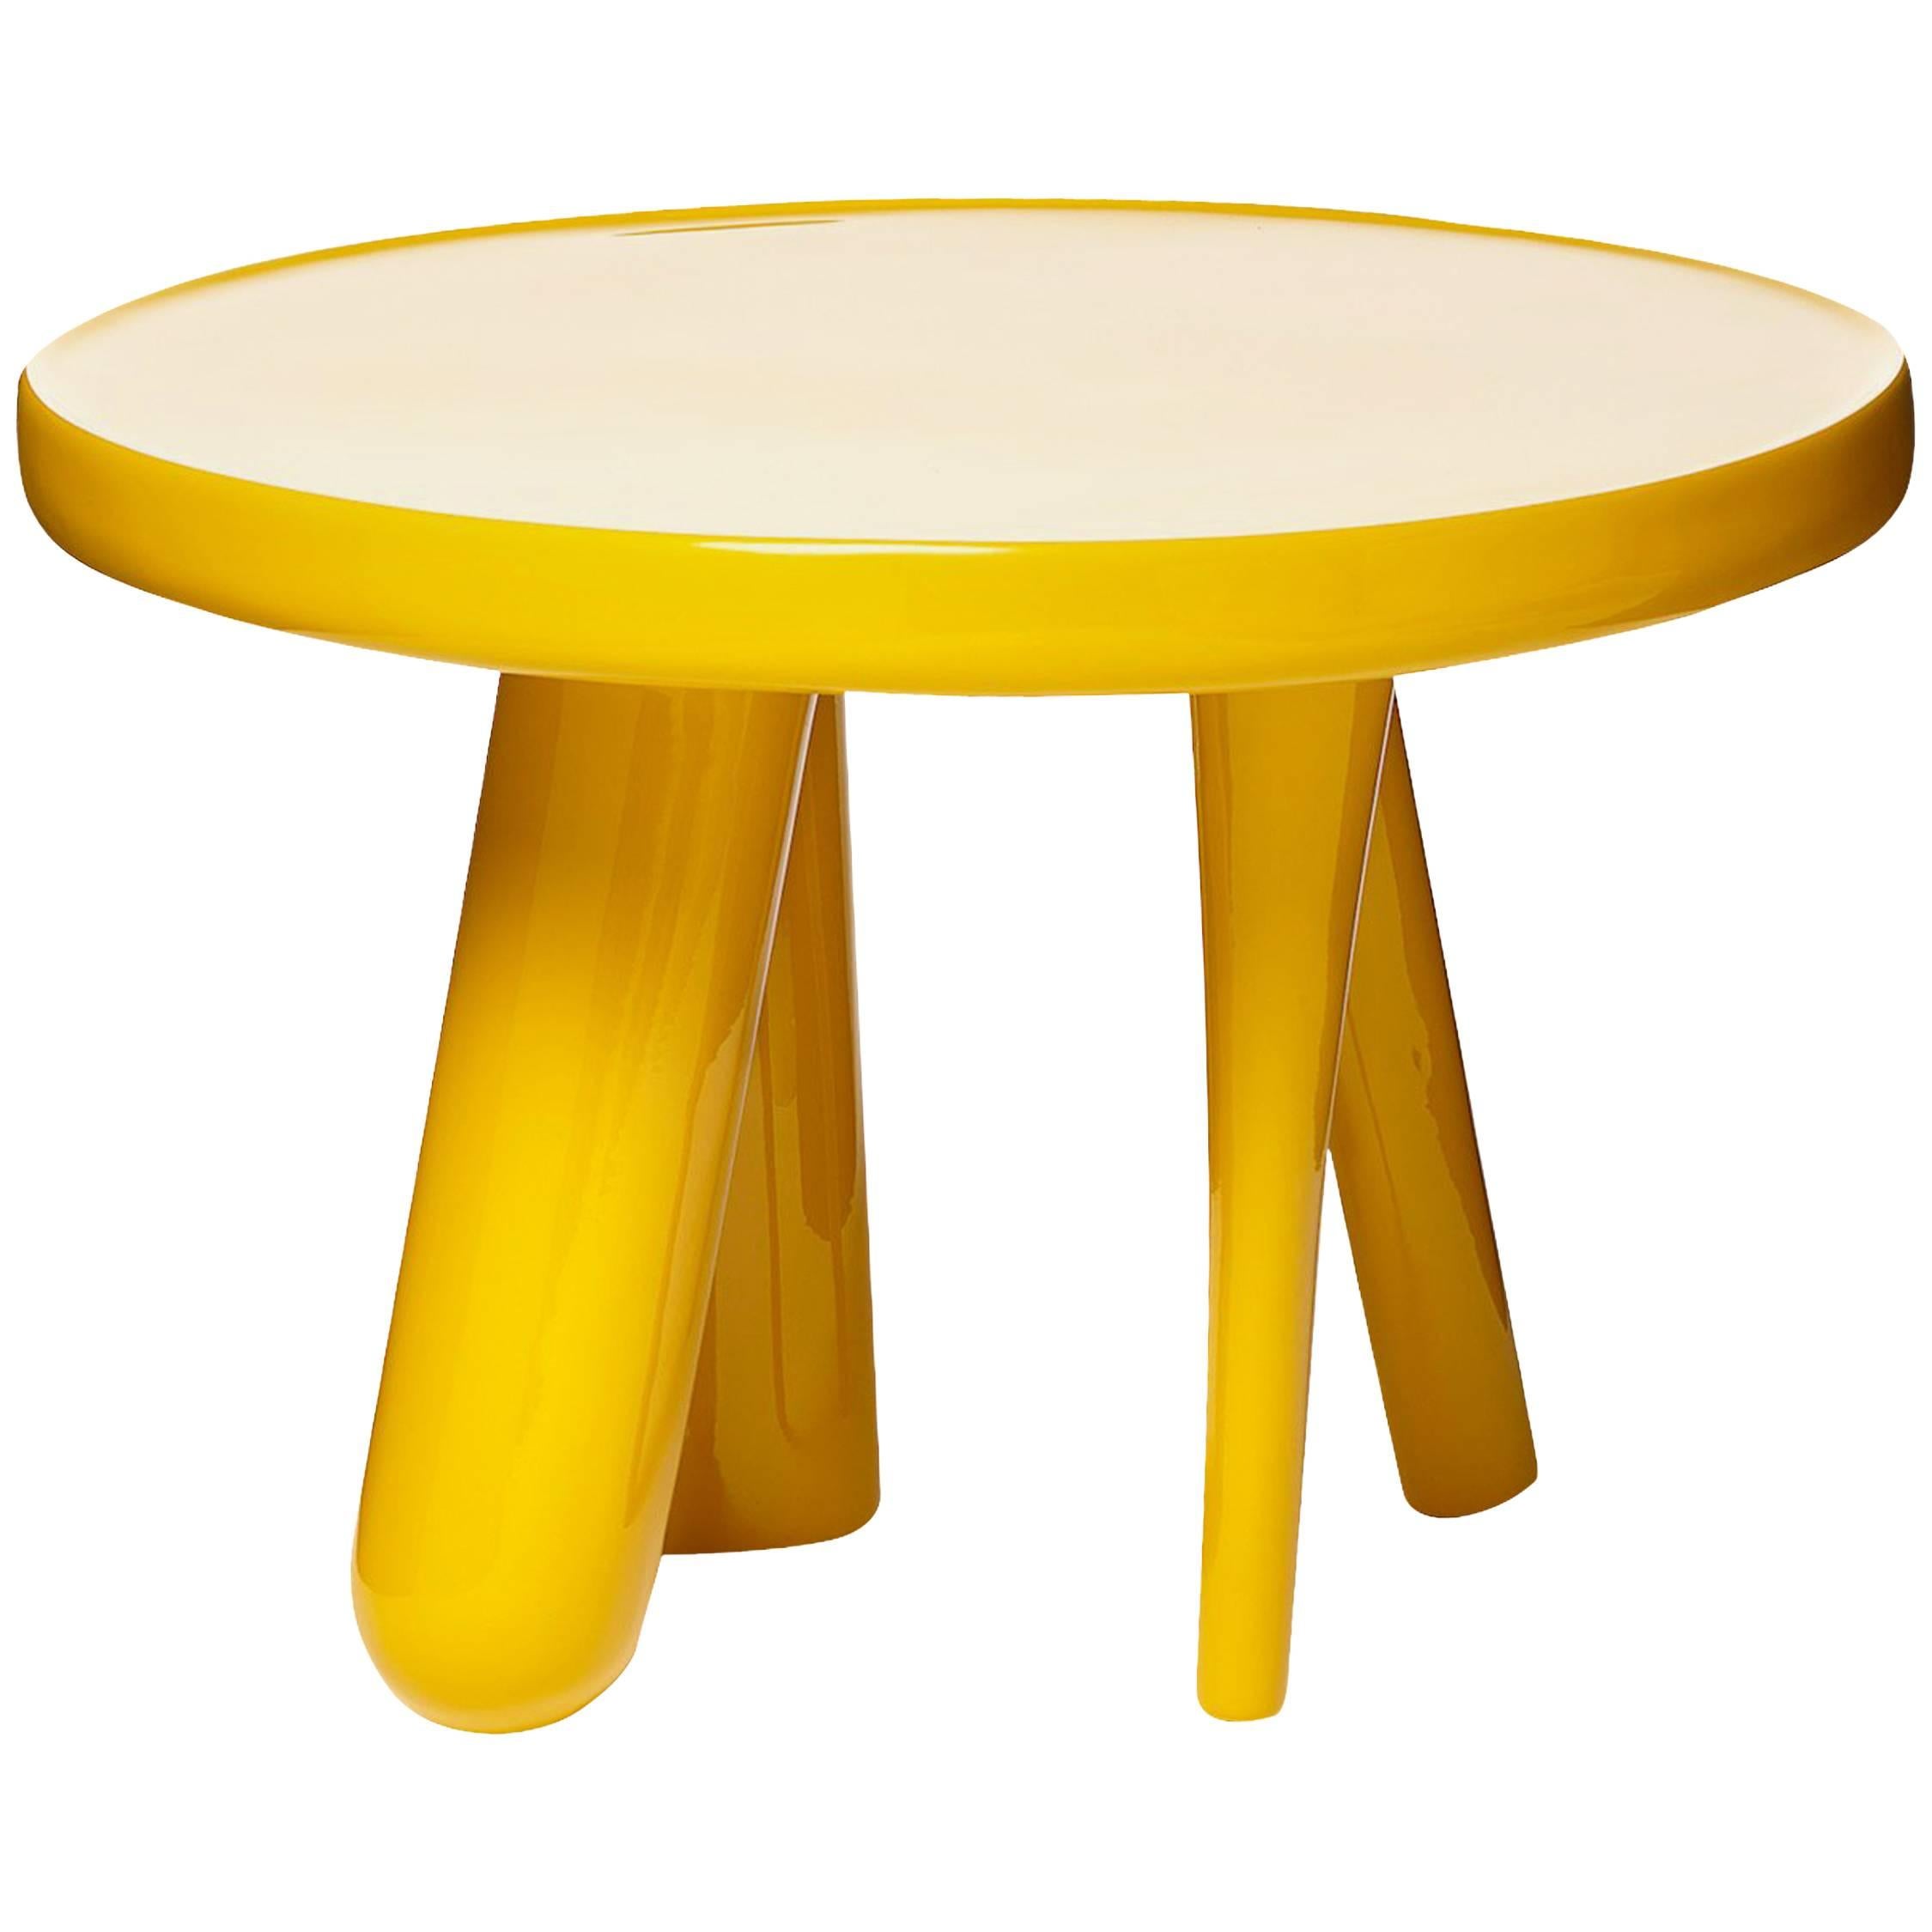 Moooi Elements 002 Table by Jaime Hayon in Yellow, Light Grey or Dark Grey For Sale